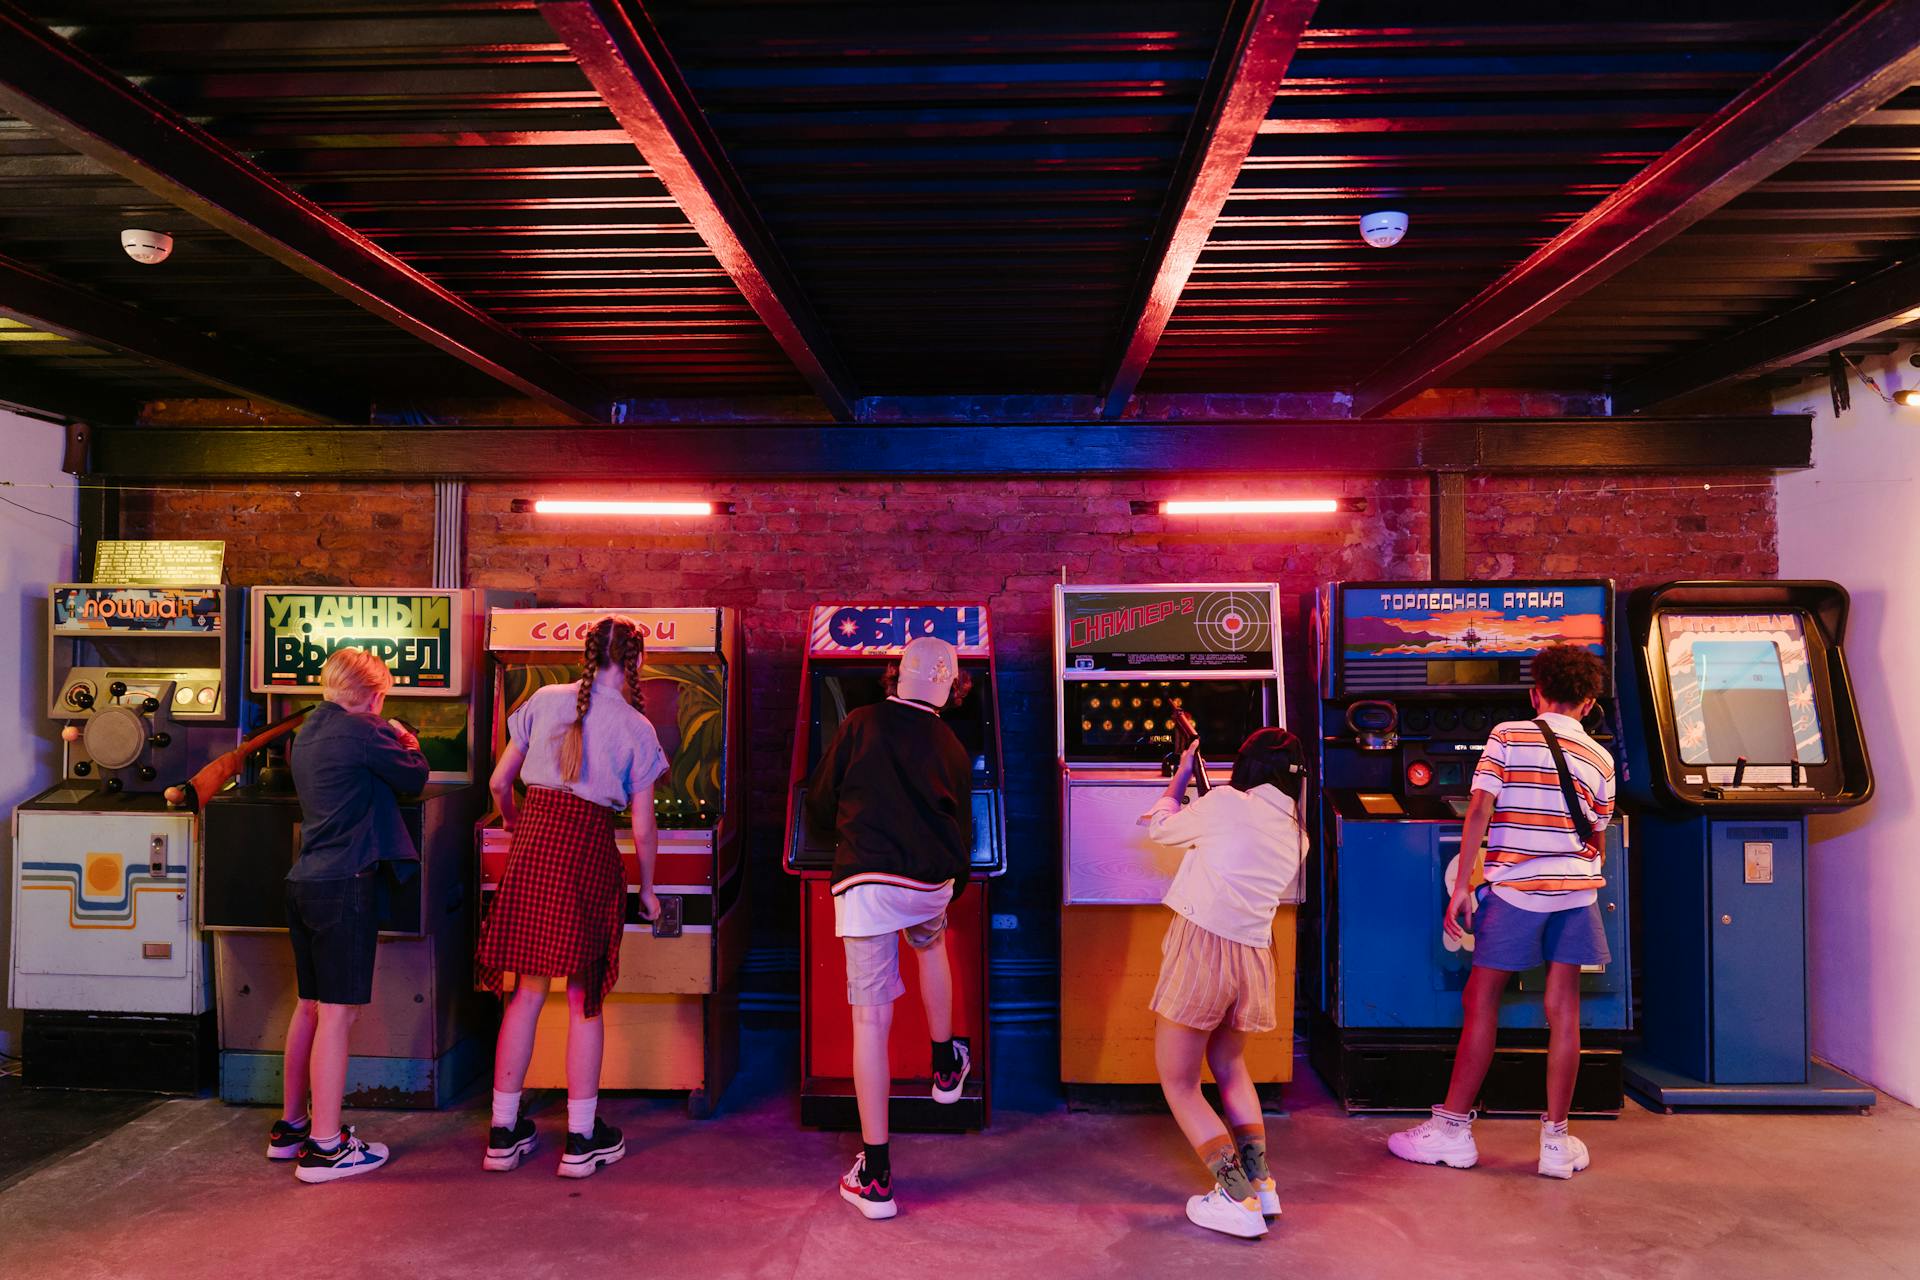 People Standing in Front of arcade games during Night Time